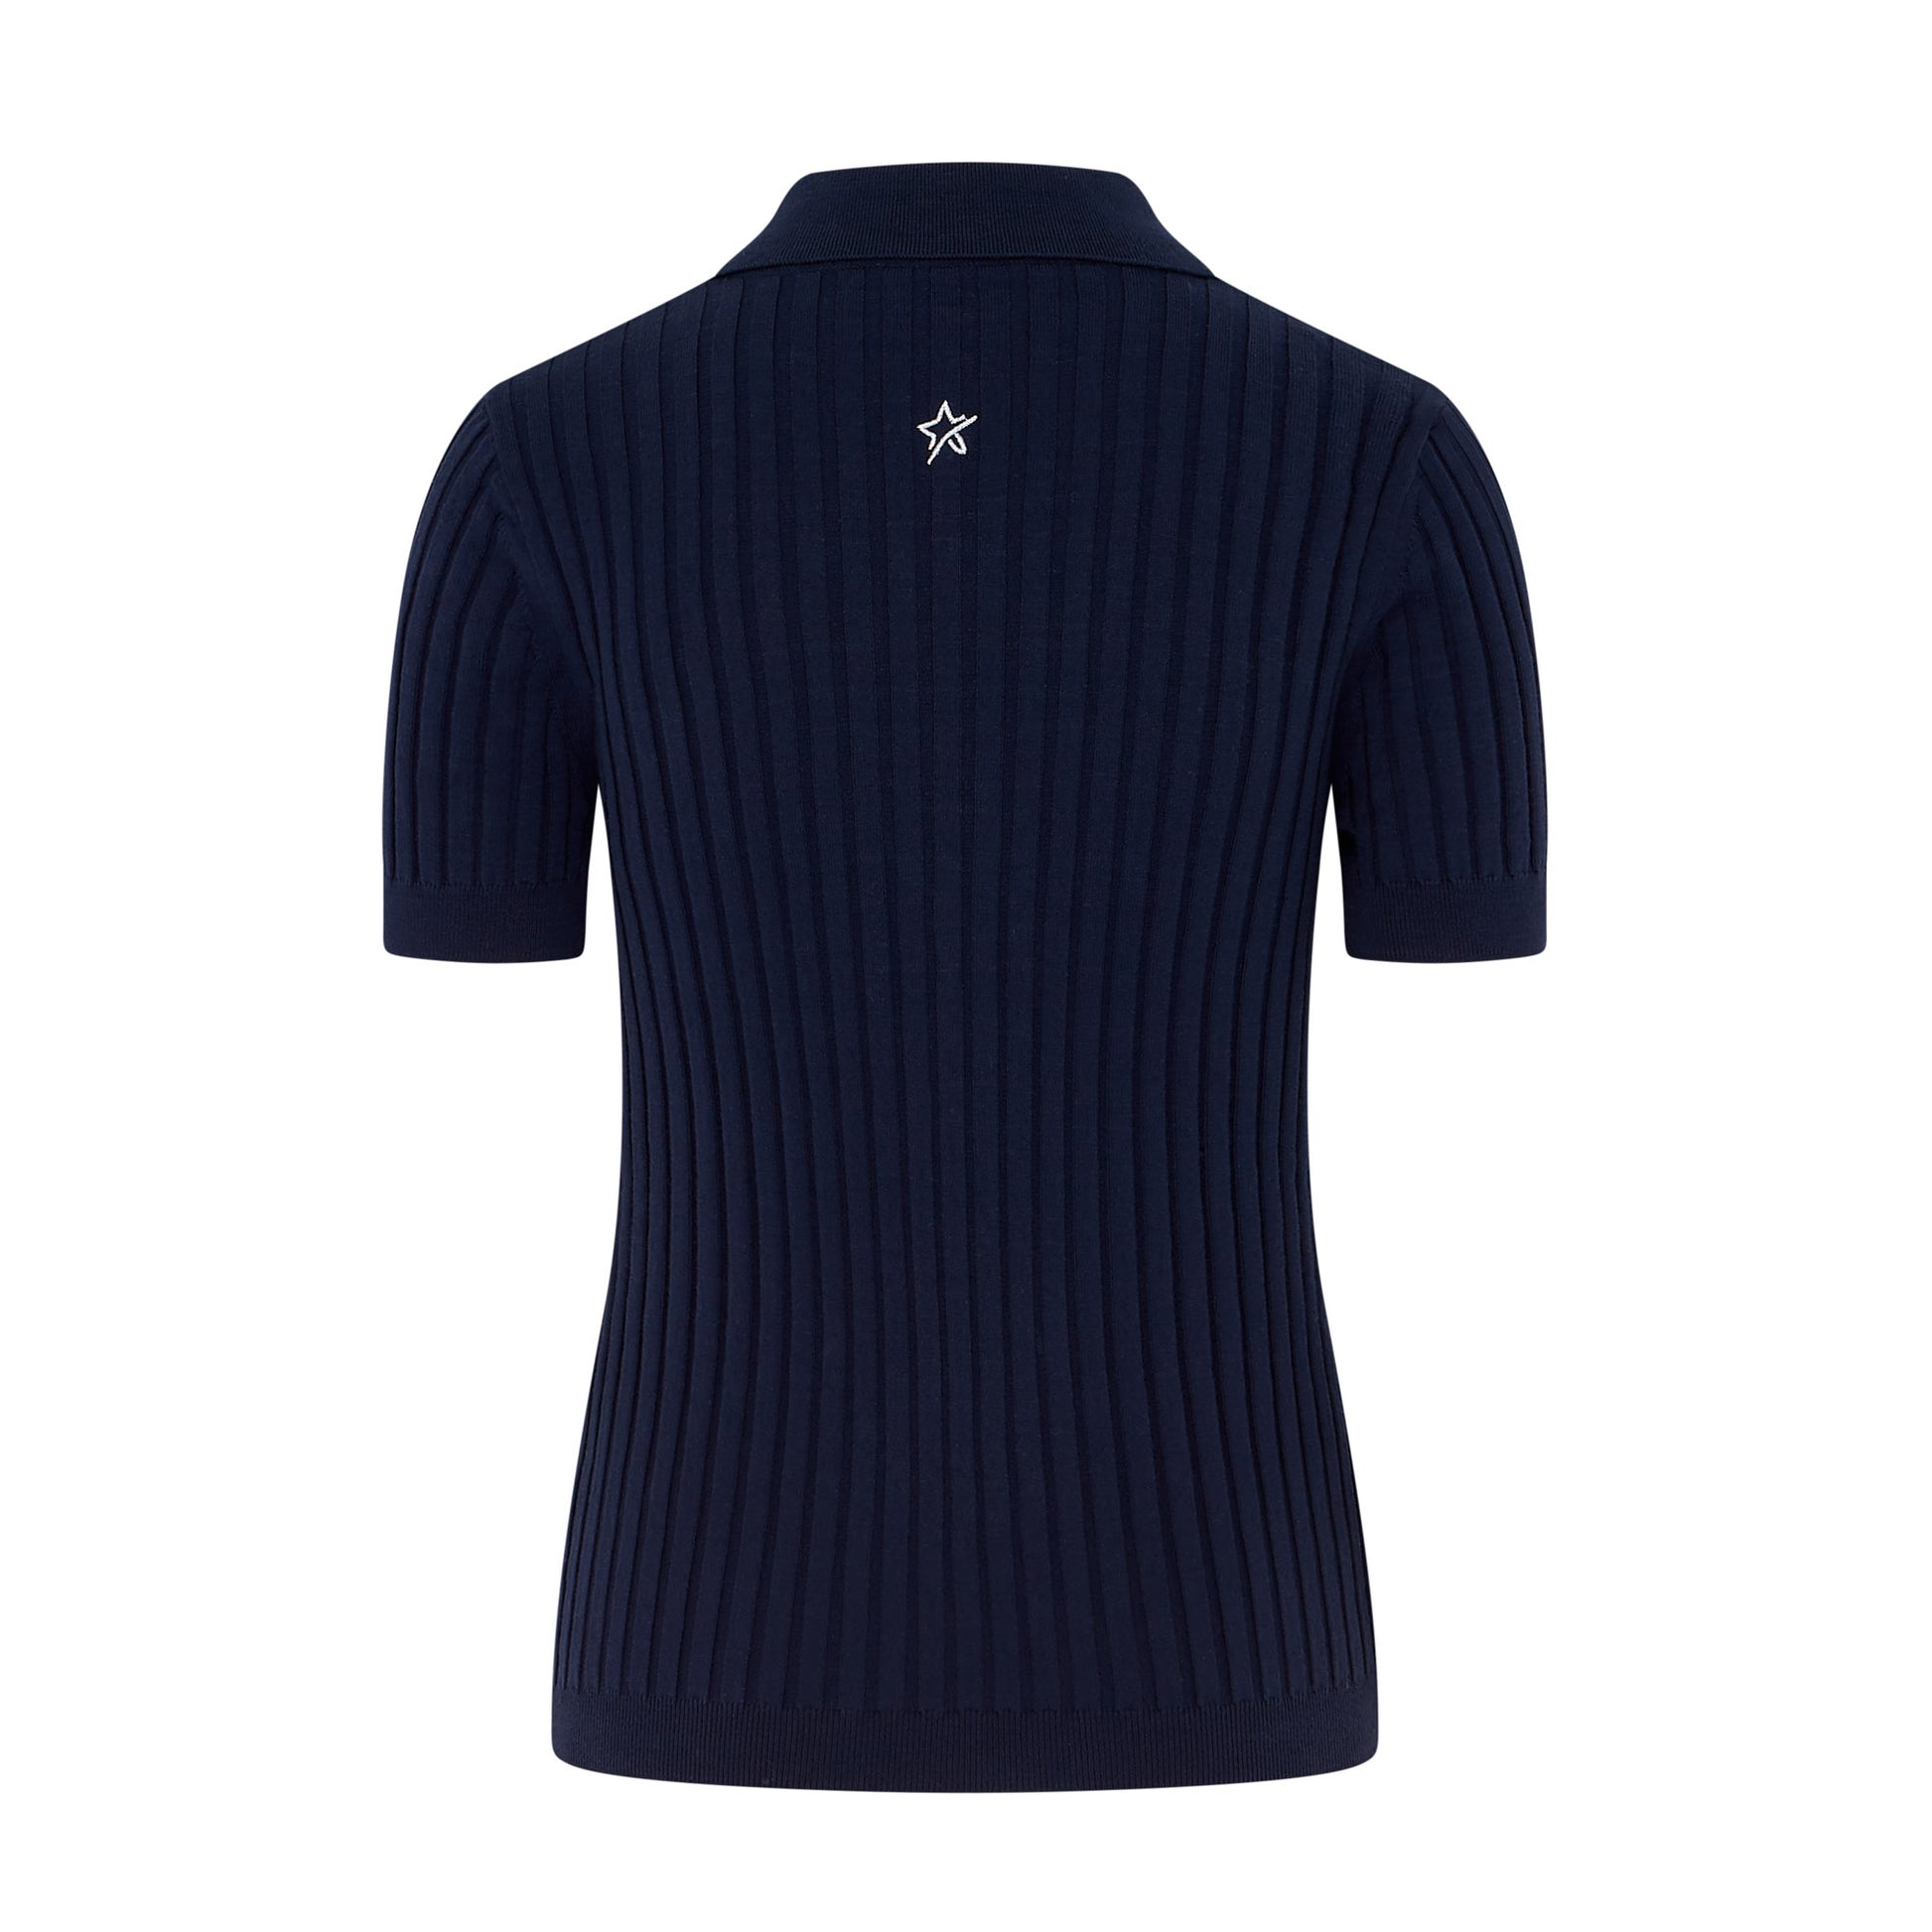 Swing Out Sister Women's Short Sleeve Knitted Top in Navy Blazer